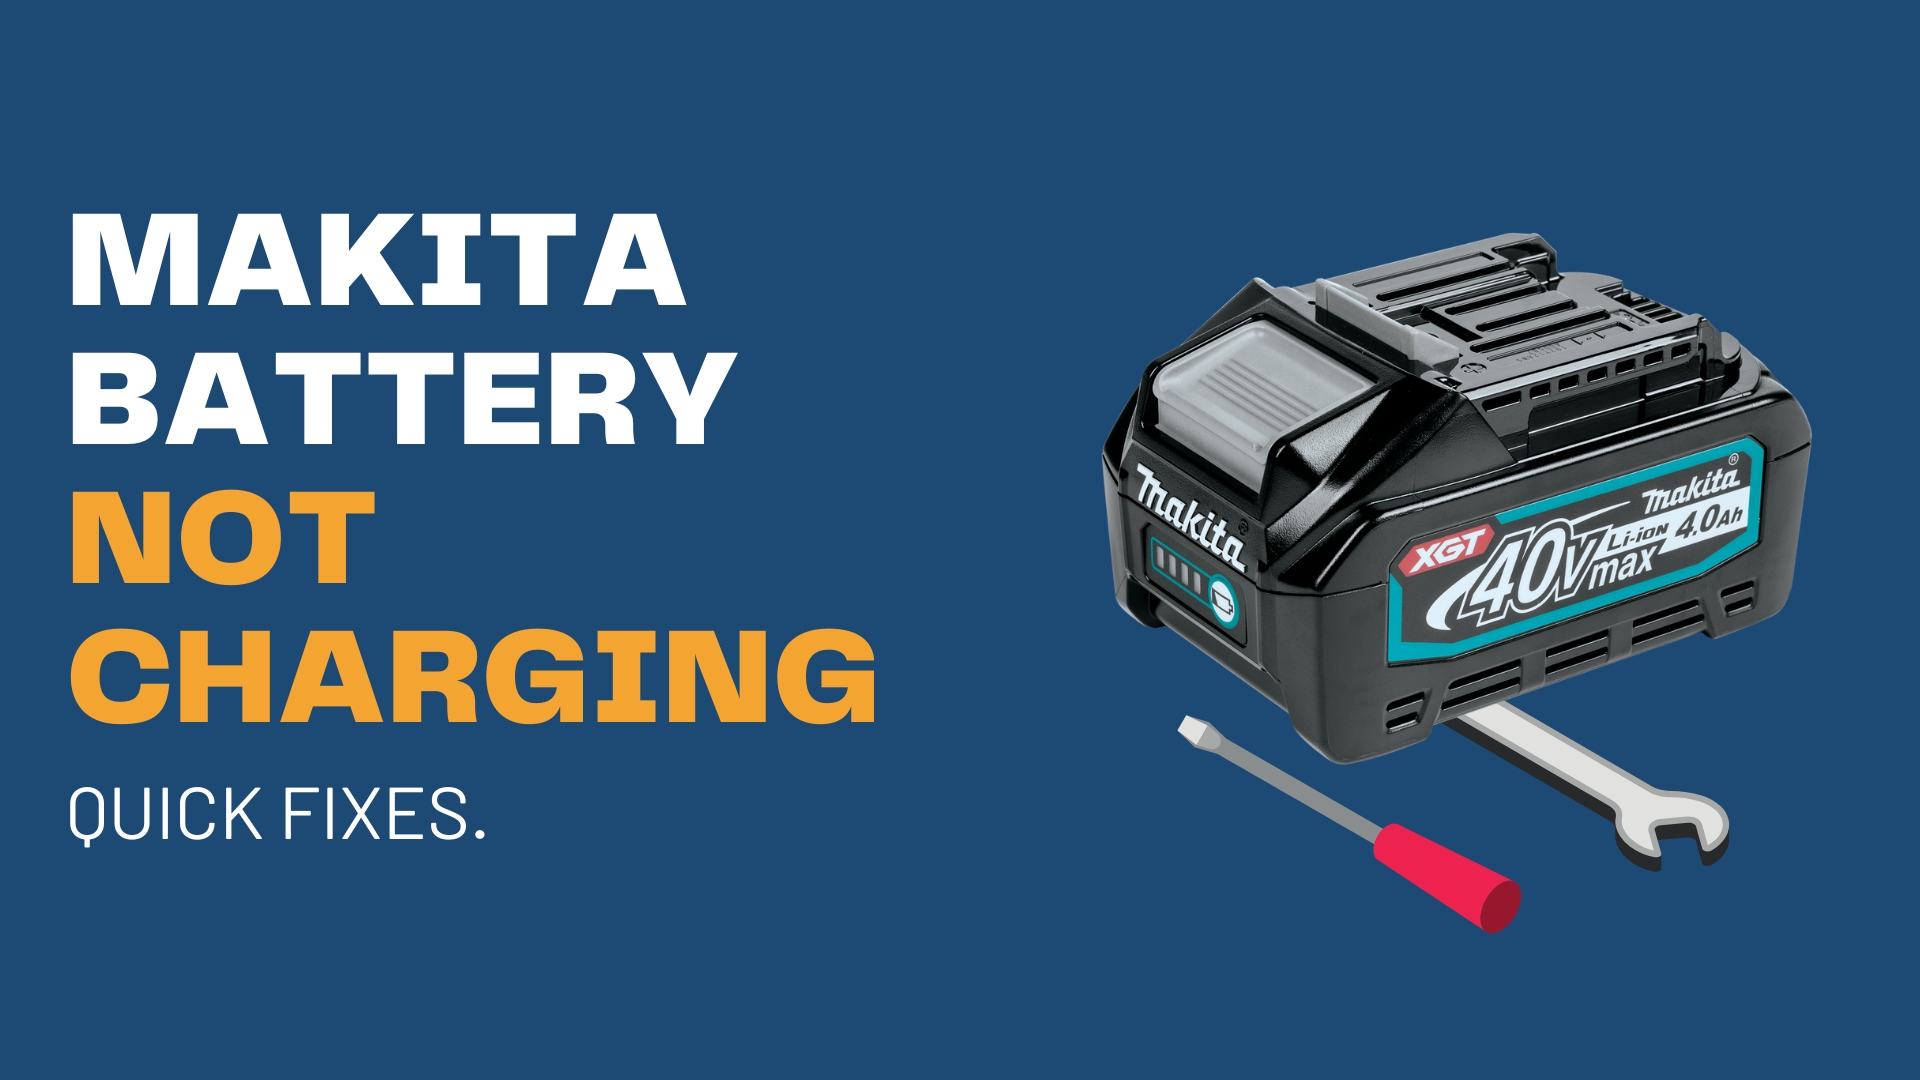 Skov kulstof Rige Makita Battery Not Charging - 4 Quick Fixes! - Ice Age Tools